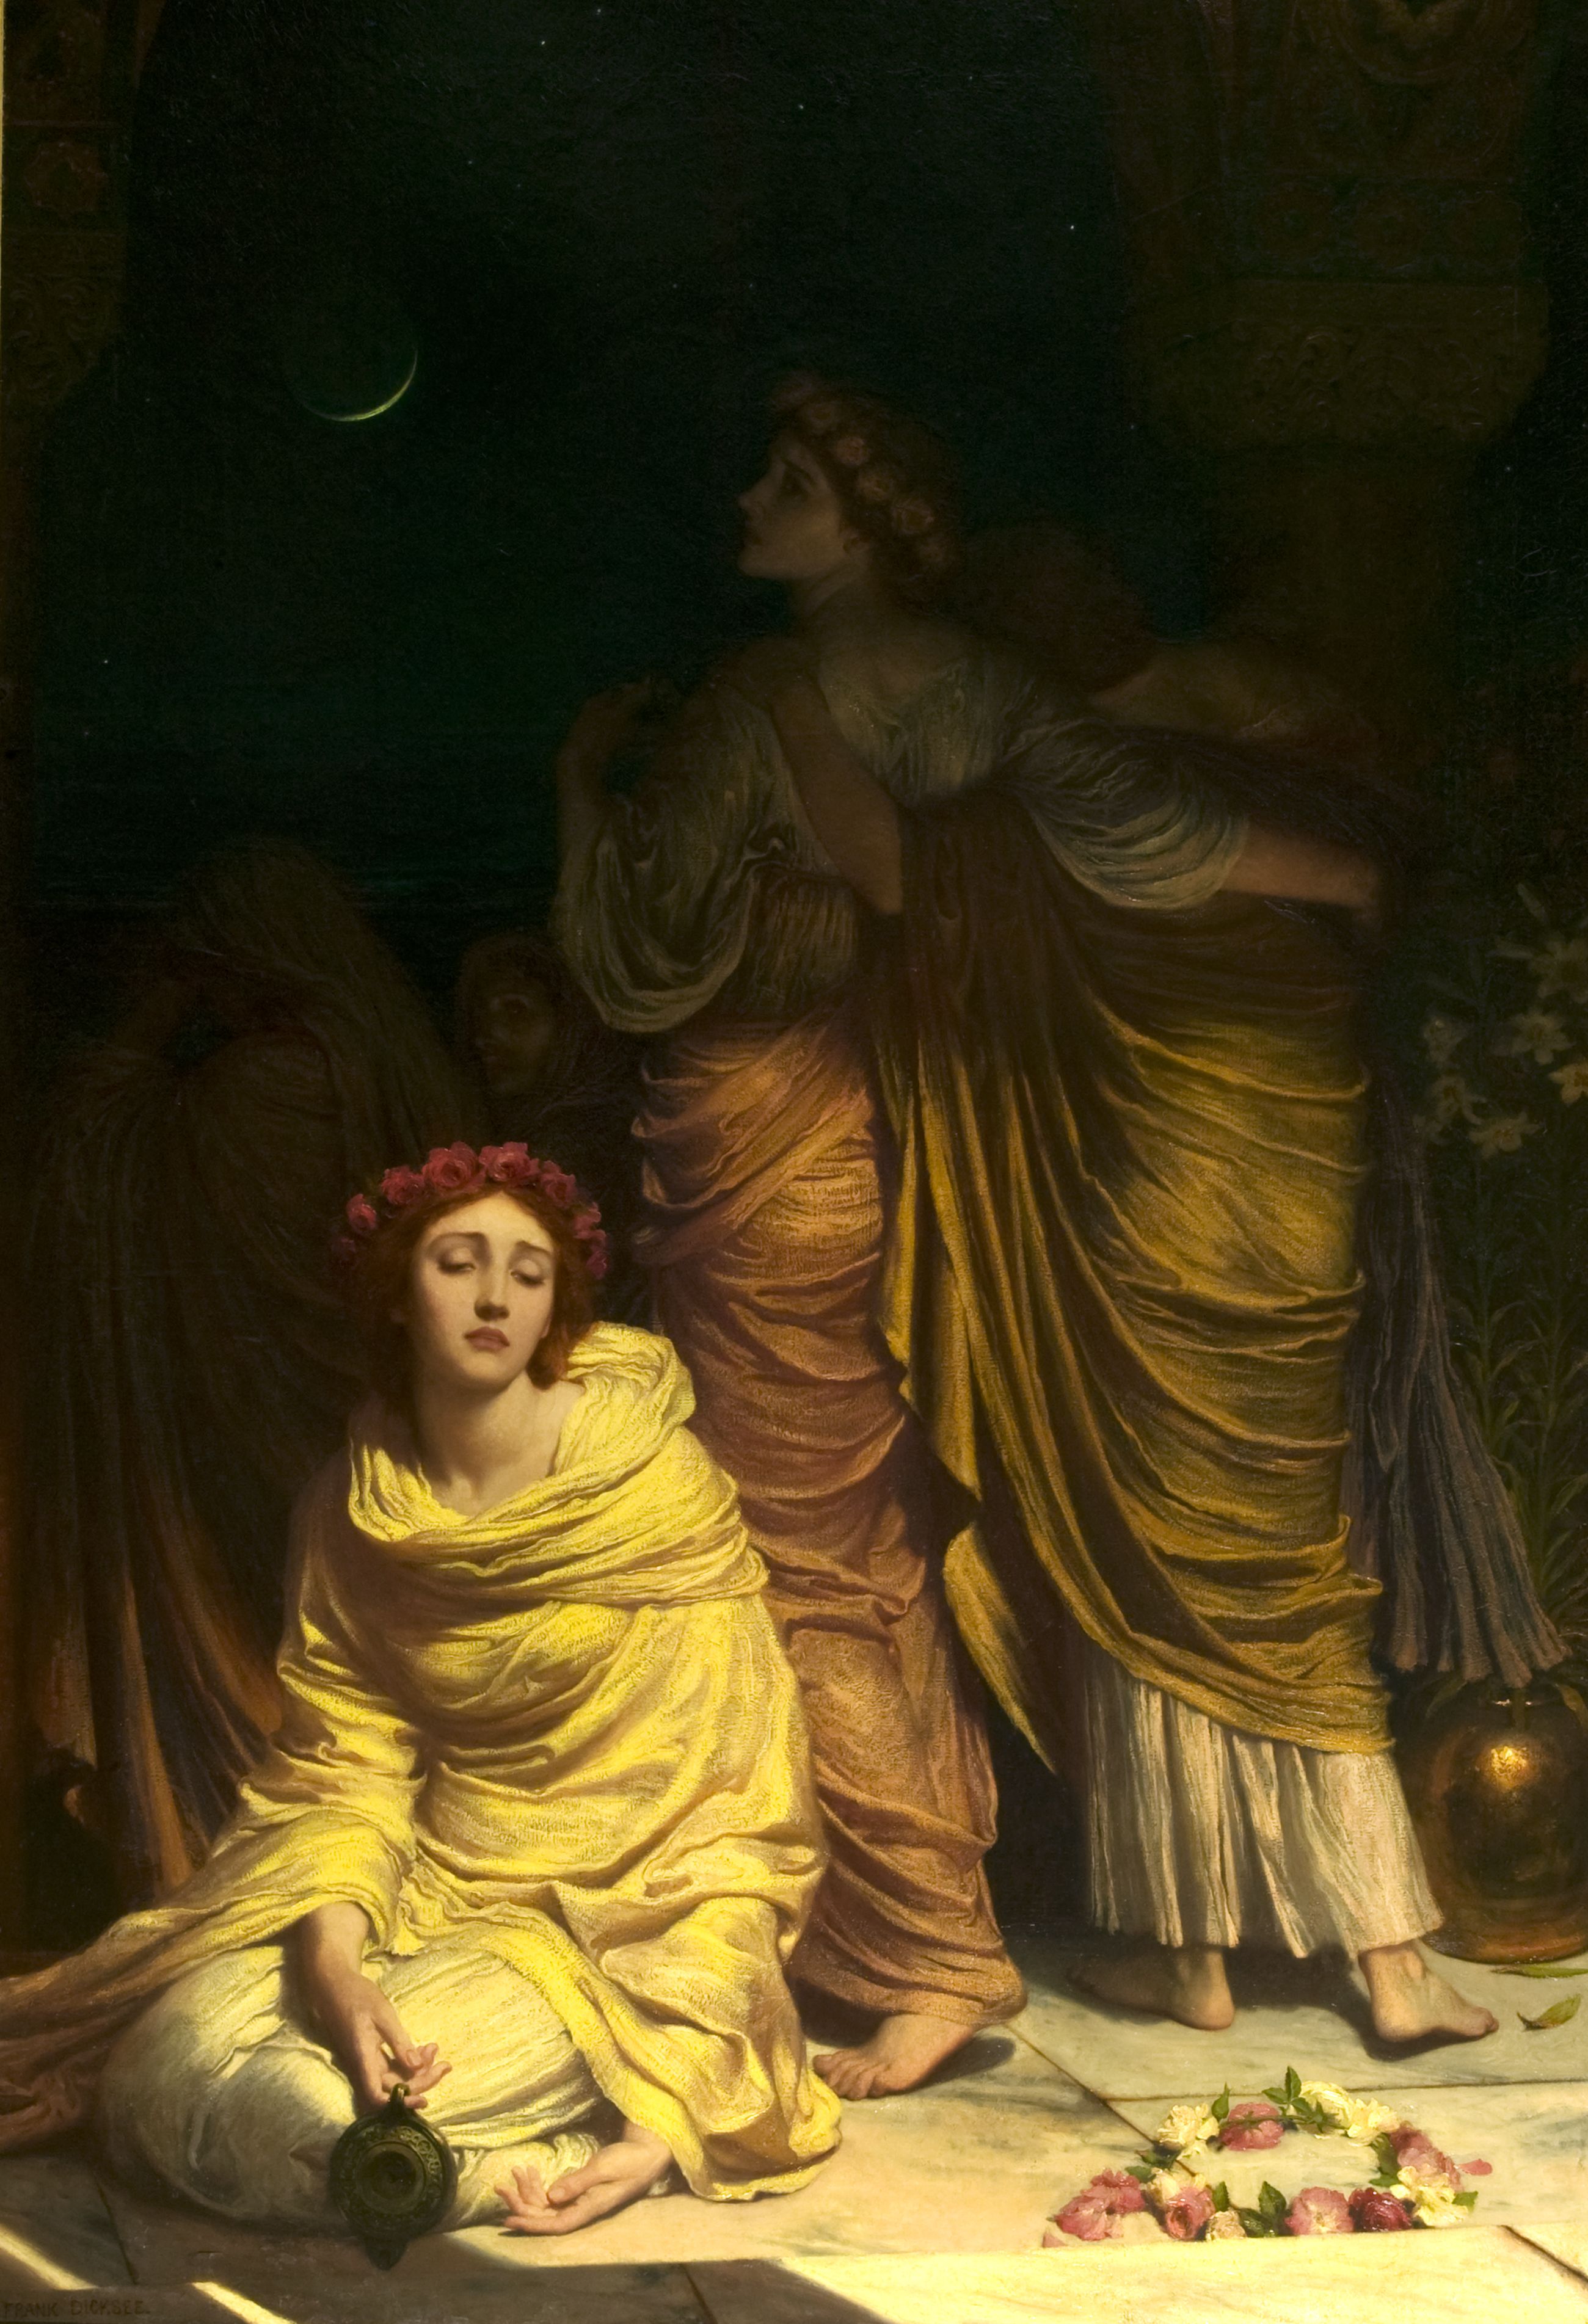 ‘The Foolish Virgins; too late ye cannot enter now’ by Frank Bernard Dicksee, 1883